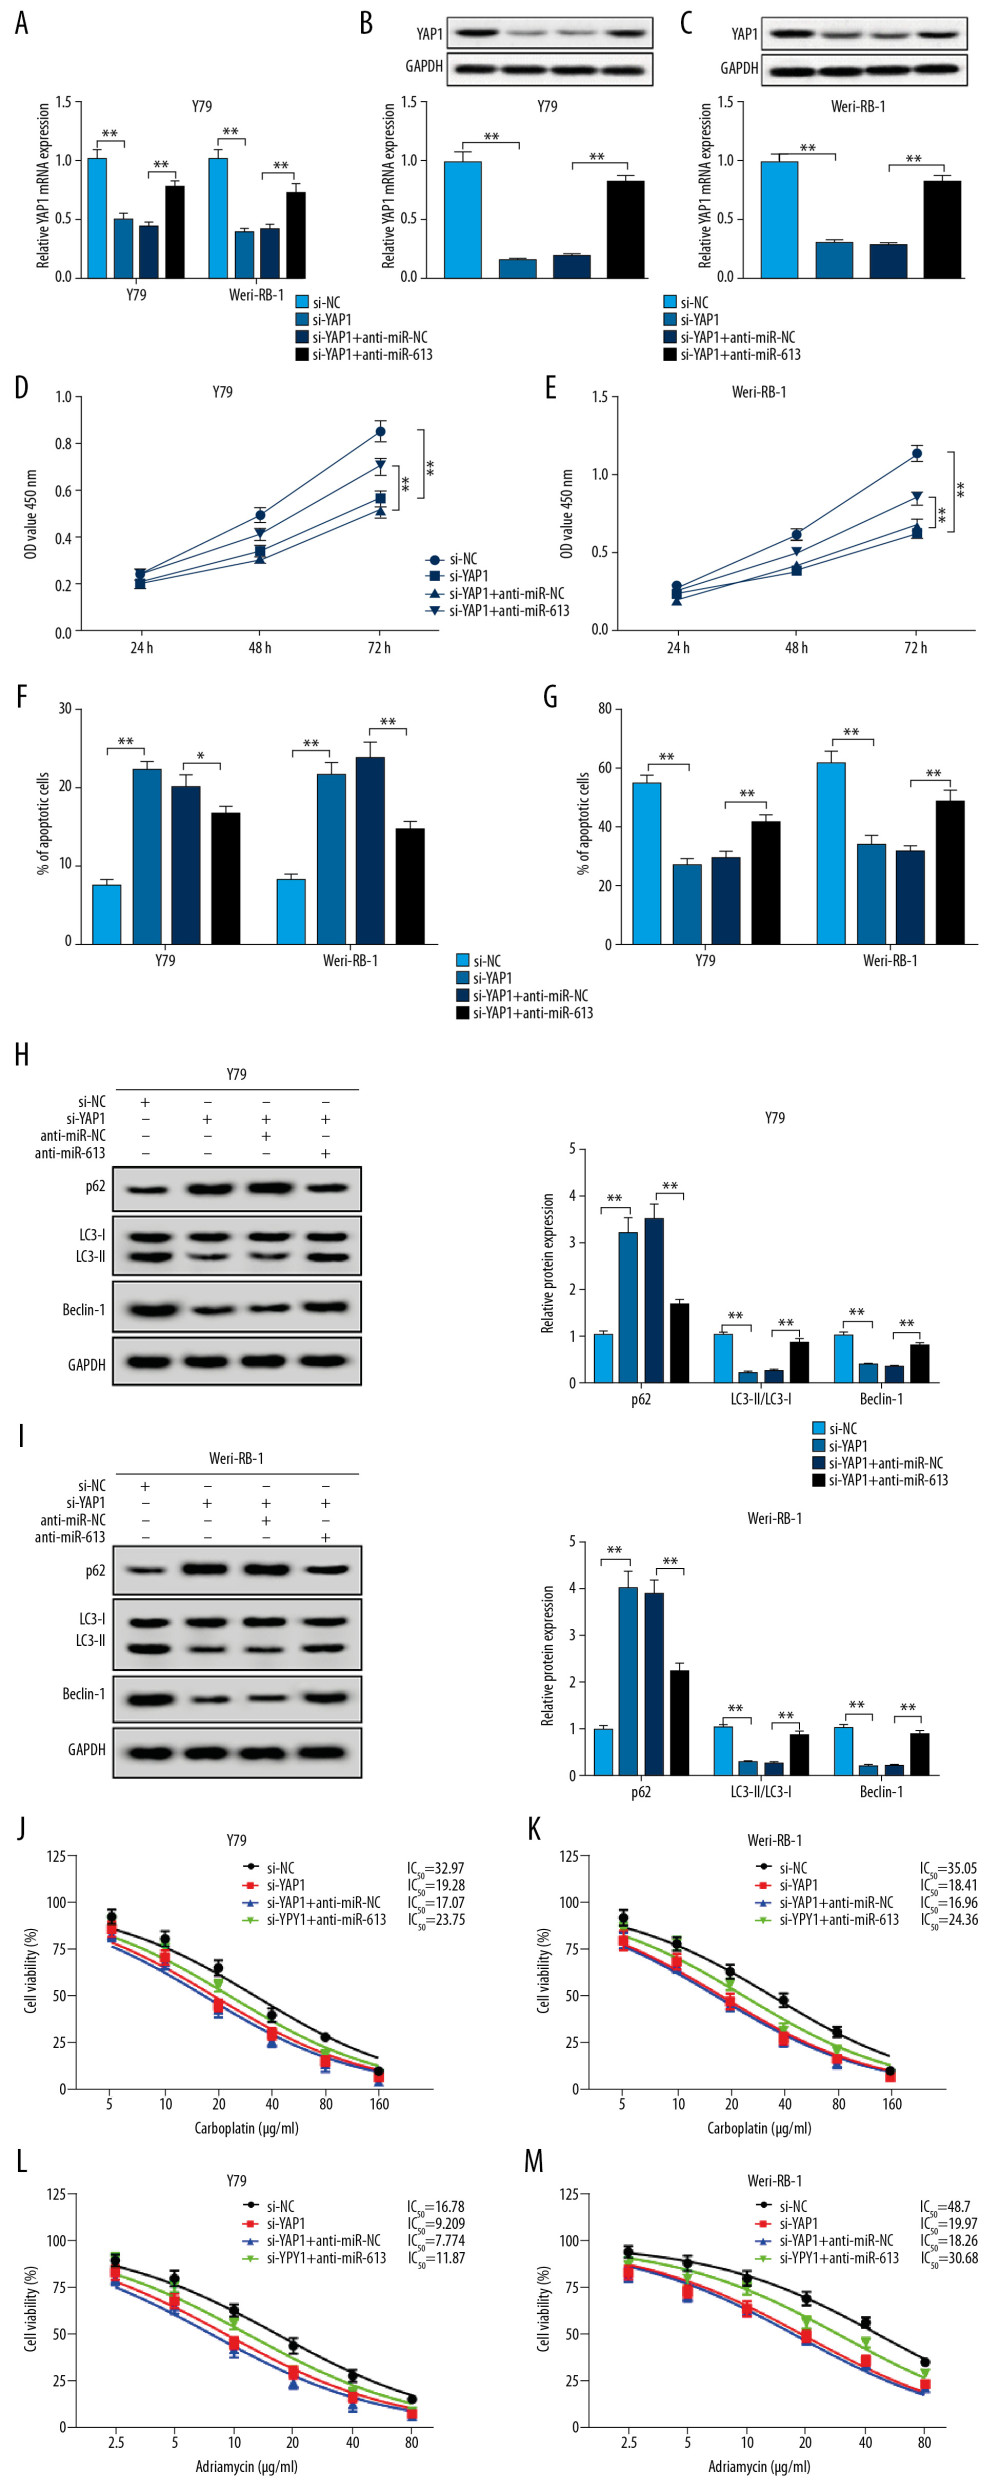 MiR-613 regulated proliferation, invasion, autophagy, apoptosis and chemoresistance of retinoblastoma cells by affecting YAP1 expression. (A–M) Y79 and Weri-RB-1 cells were transfected with si-NC, si-YAP1, si-YAP1+anti-miR-NC, or si-YAP1+anti-miR-613. (A–C) The expression levels of YAP1 in transfected Y79 and Weri-RB-1 cells were measured by RT-qPCR and western blot assays. (D, E) Cell viability was evaluated by CCK-8 assay in Y79 and Weri-RB-1 cells after transfection. (F) Cell apoptosis rate was analyzed in Y79 and Weri-RB-1 cells with flow cytometry assay. (G) Transwell assay was performed to assess invasion ability of Y79 and Weri-RB-1 cells post-transfection. (H, I) The protein expression levels of p62, LC3-I, LC3-II and Beclin-1 were determined with western blot assay. (J–M) IC50 value of carboplatin and adriamycin in Y79 and Weri-RB-1 cells was calculated with CCK-8 assay. ** P<0.01. RT-qPCR – real-time quantitative polymerase chain reaction; CCK-8 – Cell Counting Kit-8.